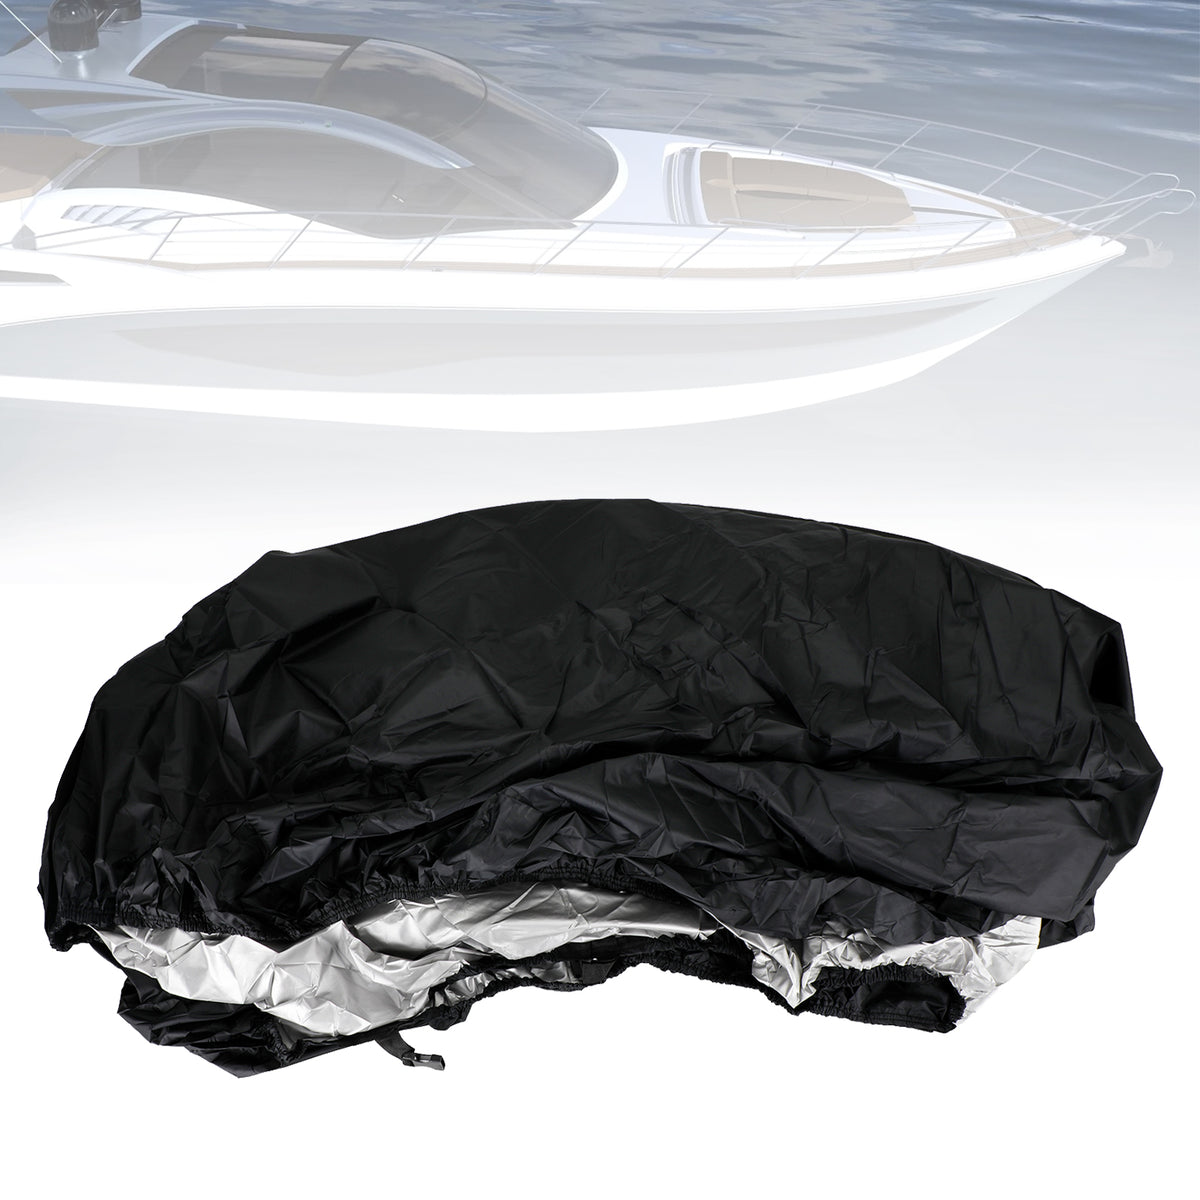 Universal Waterproof Duty Boat Cover 14-16Ft Black For Fishing Boat Shelter